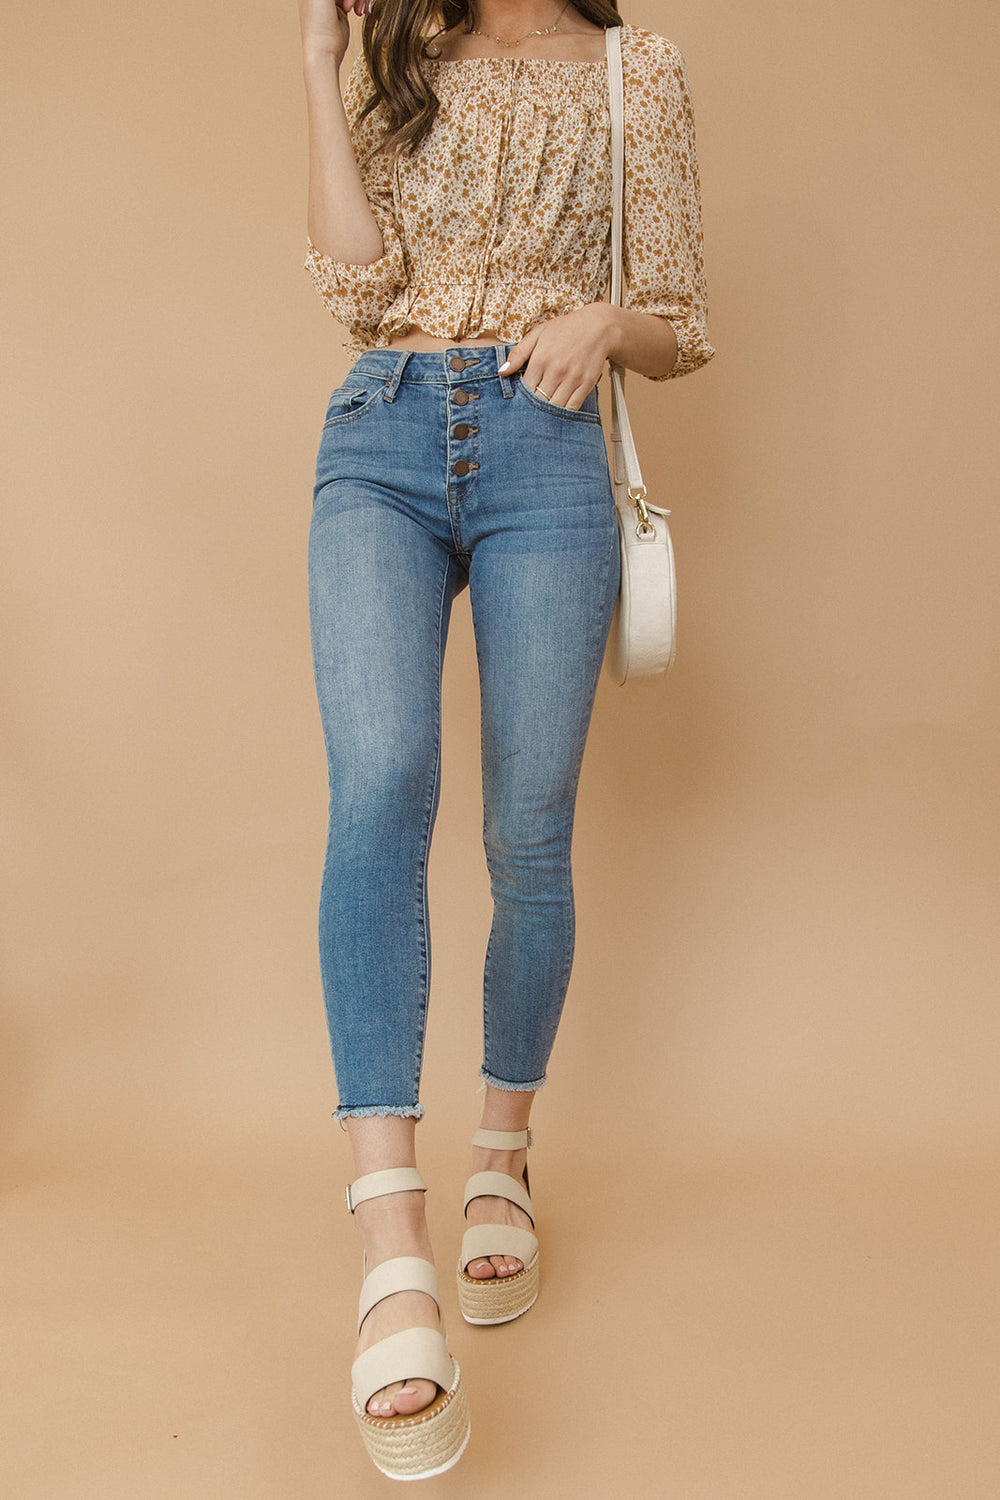 JBD | Spring into Spring Jeans | 3 washes-Jeans-Krush Kandy, Women's Online Fashion Boutique Located in Phoenix, Arizona (Scottsdale Area)